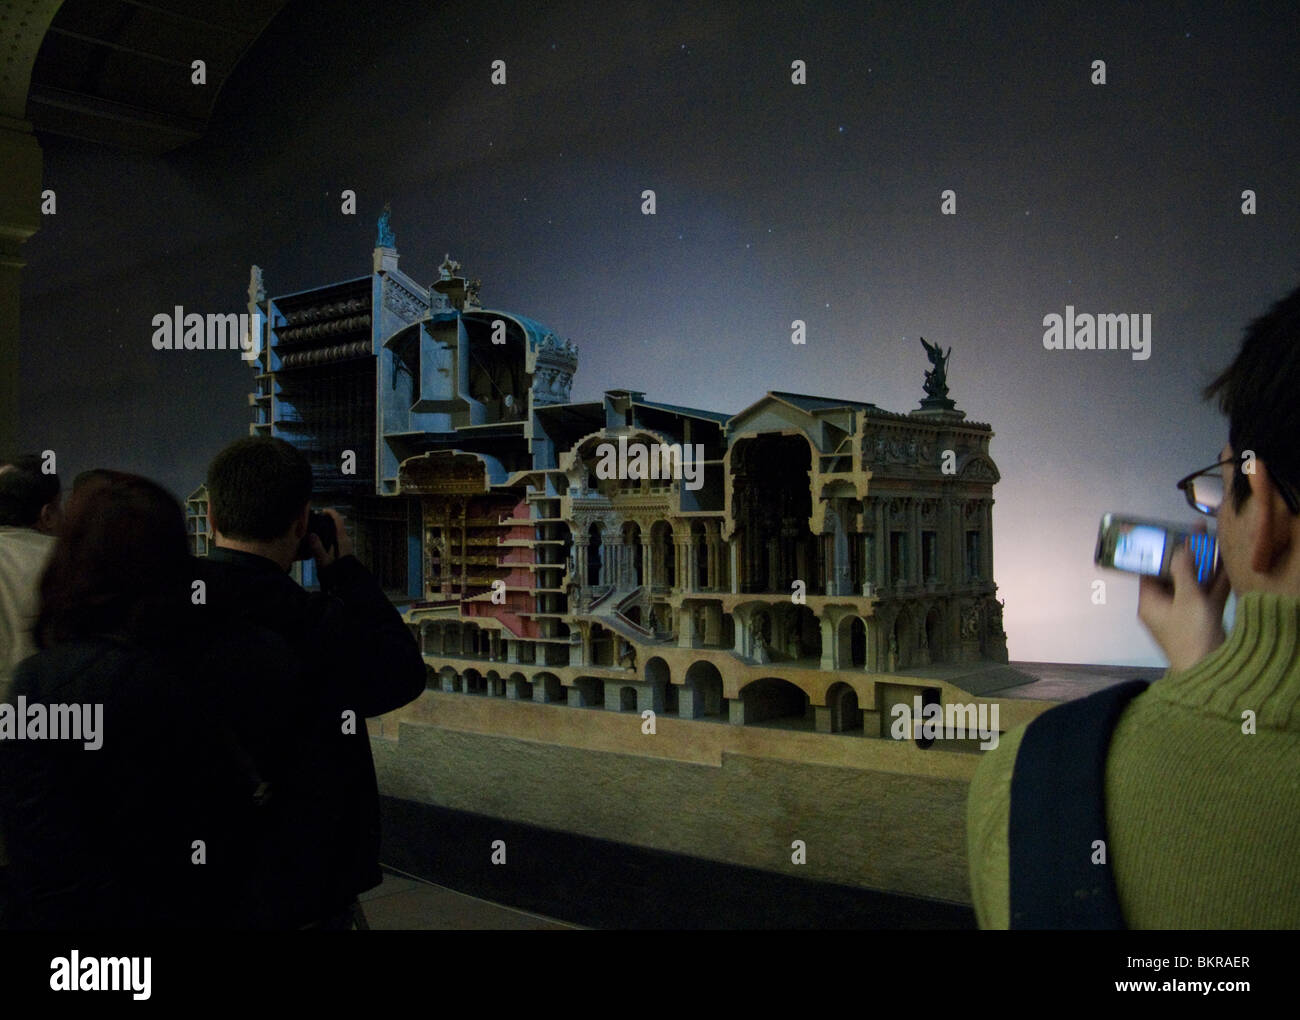 Tourists photographing a model of the Paris Opera House in the Musee D'Orsay, Paris, France. Stock Photo